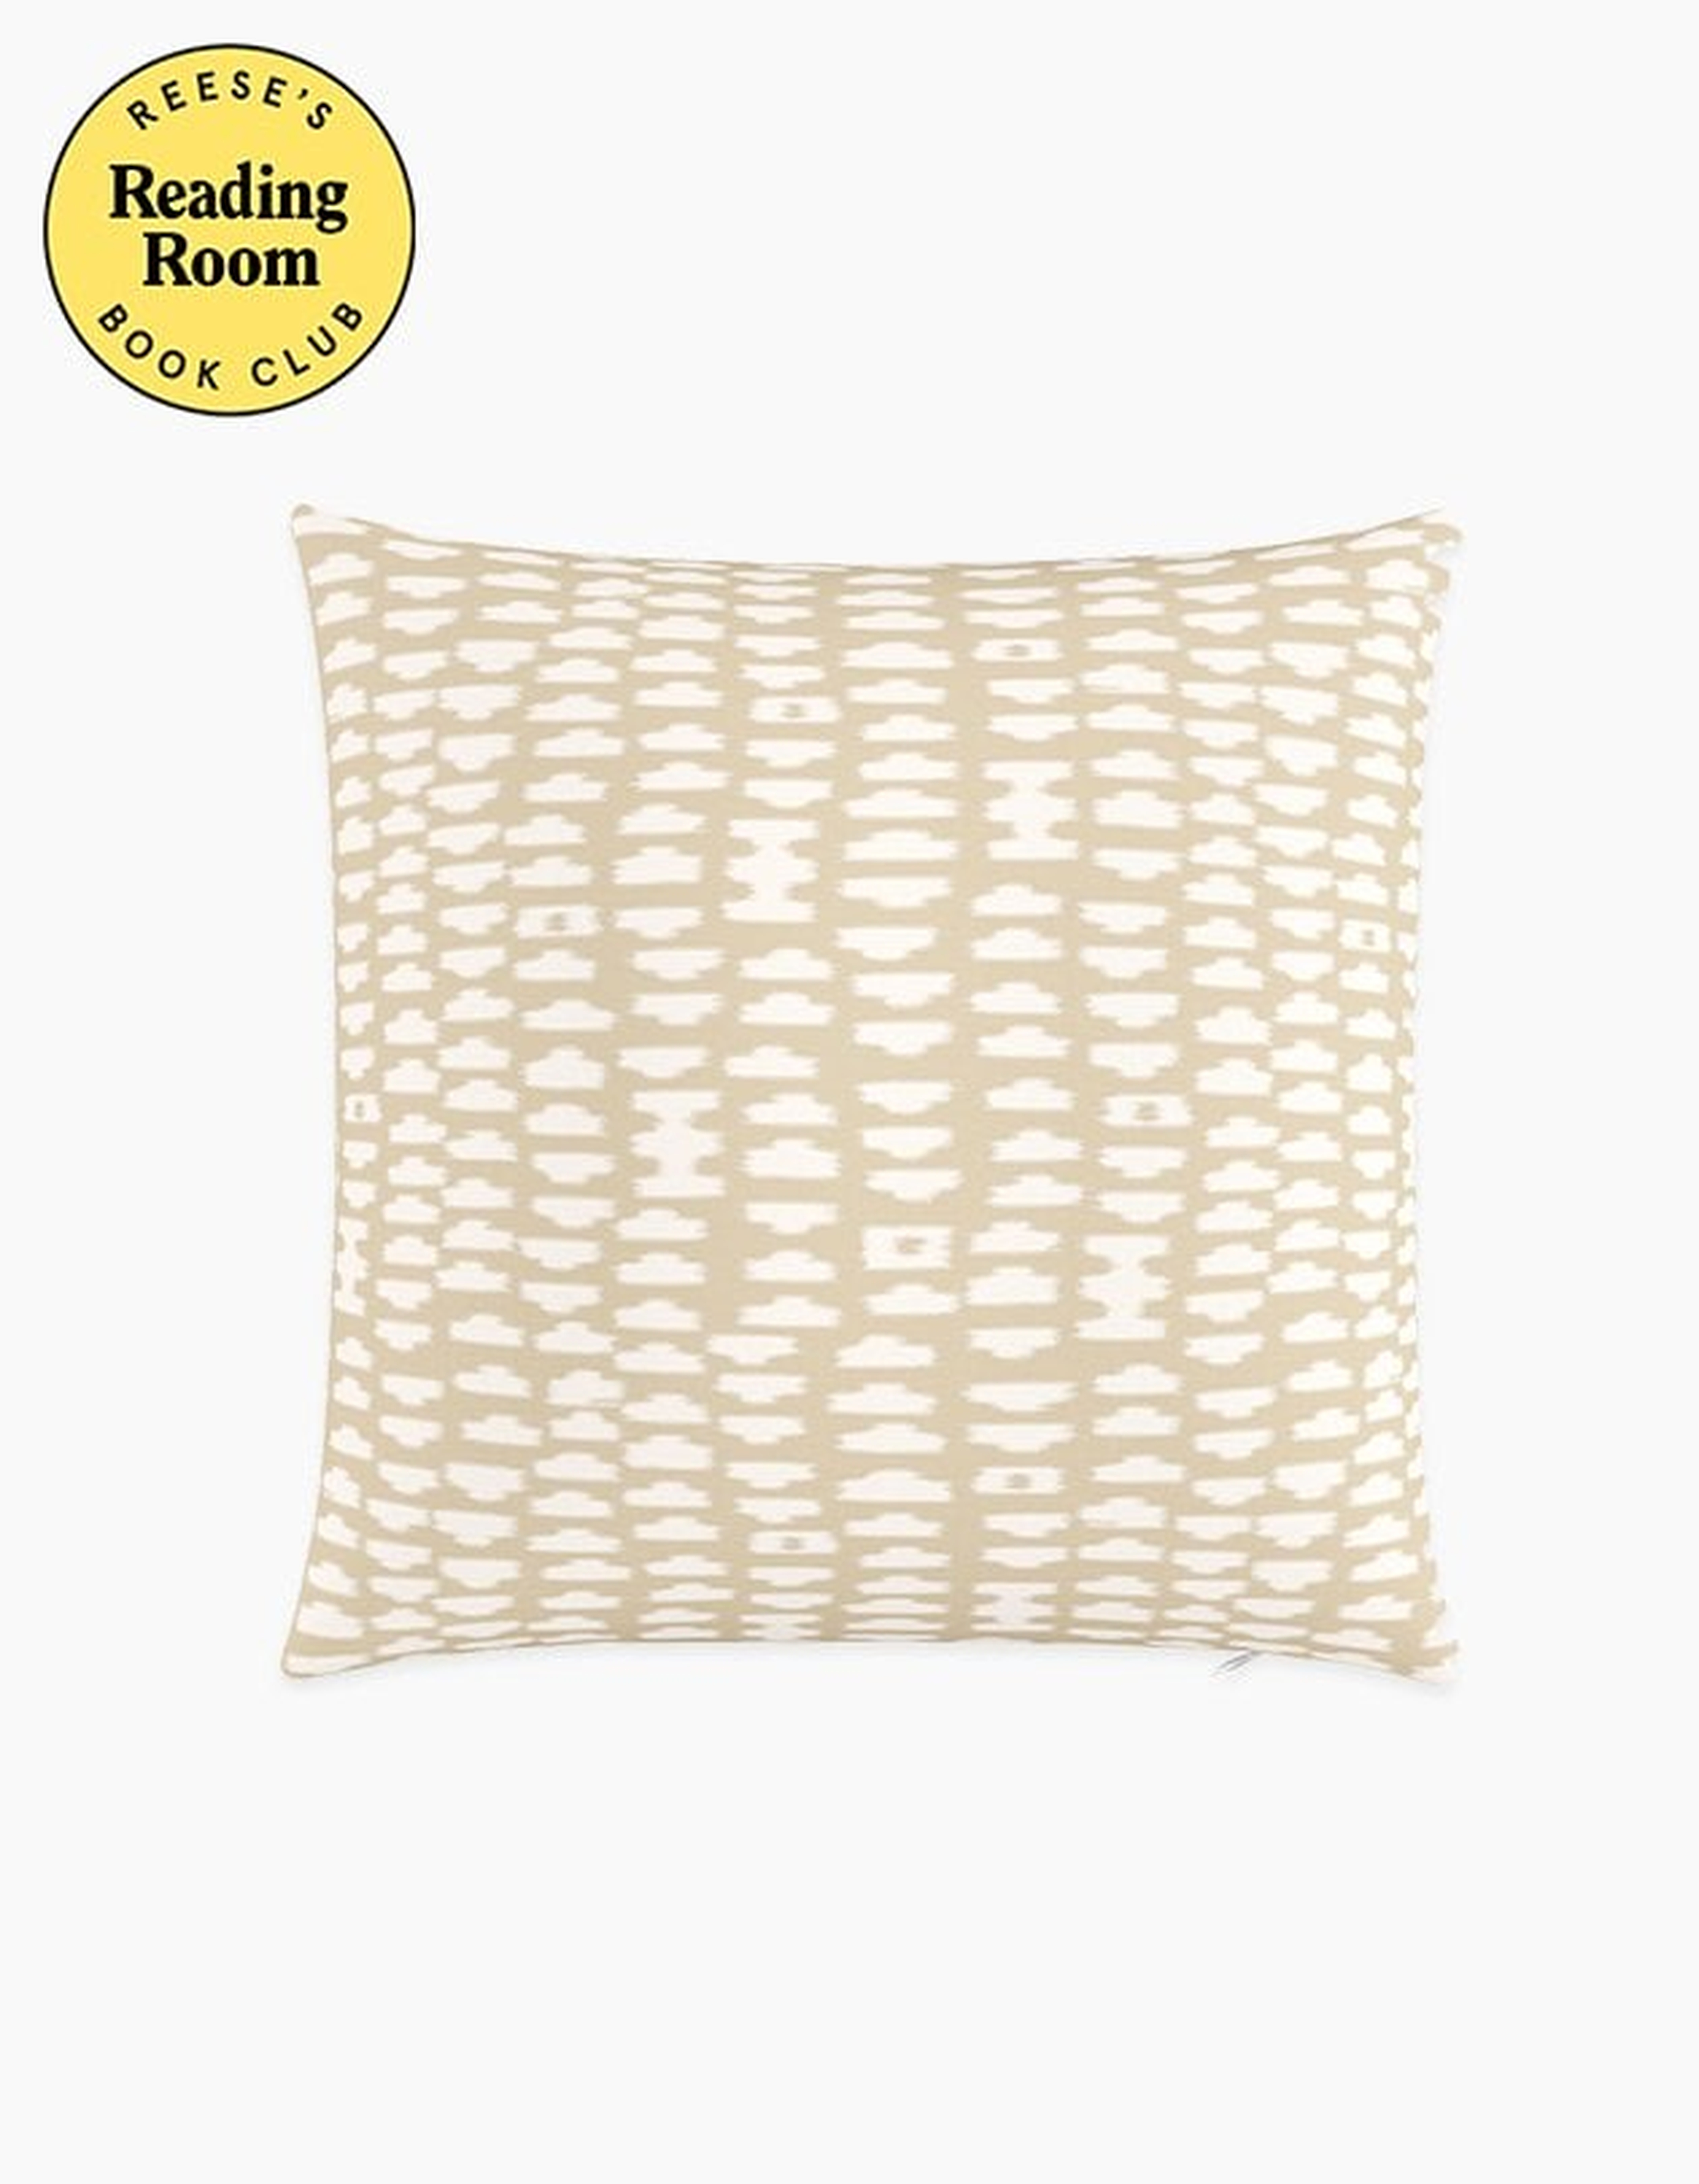 Sand Odalisque Throw Pillow - 20" x 20" - Reese's Book Club x Havenly